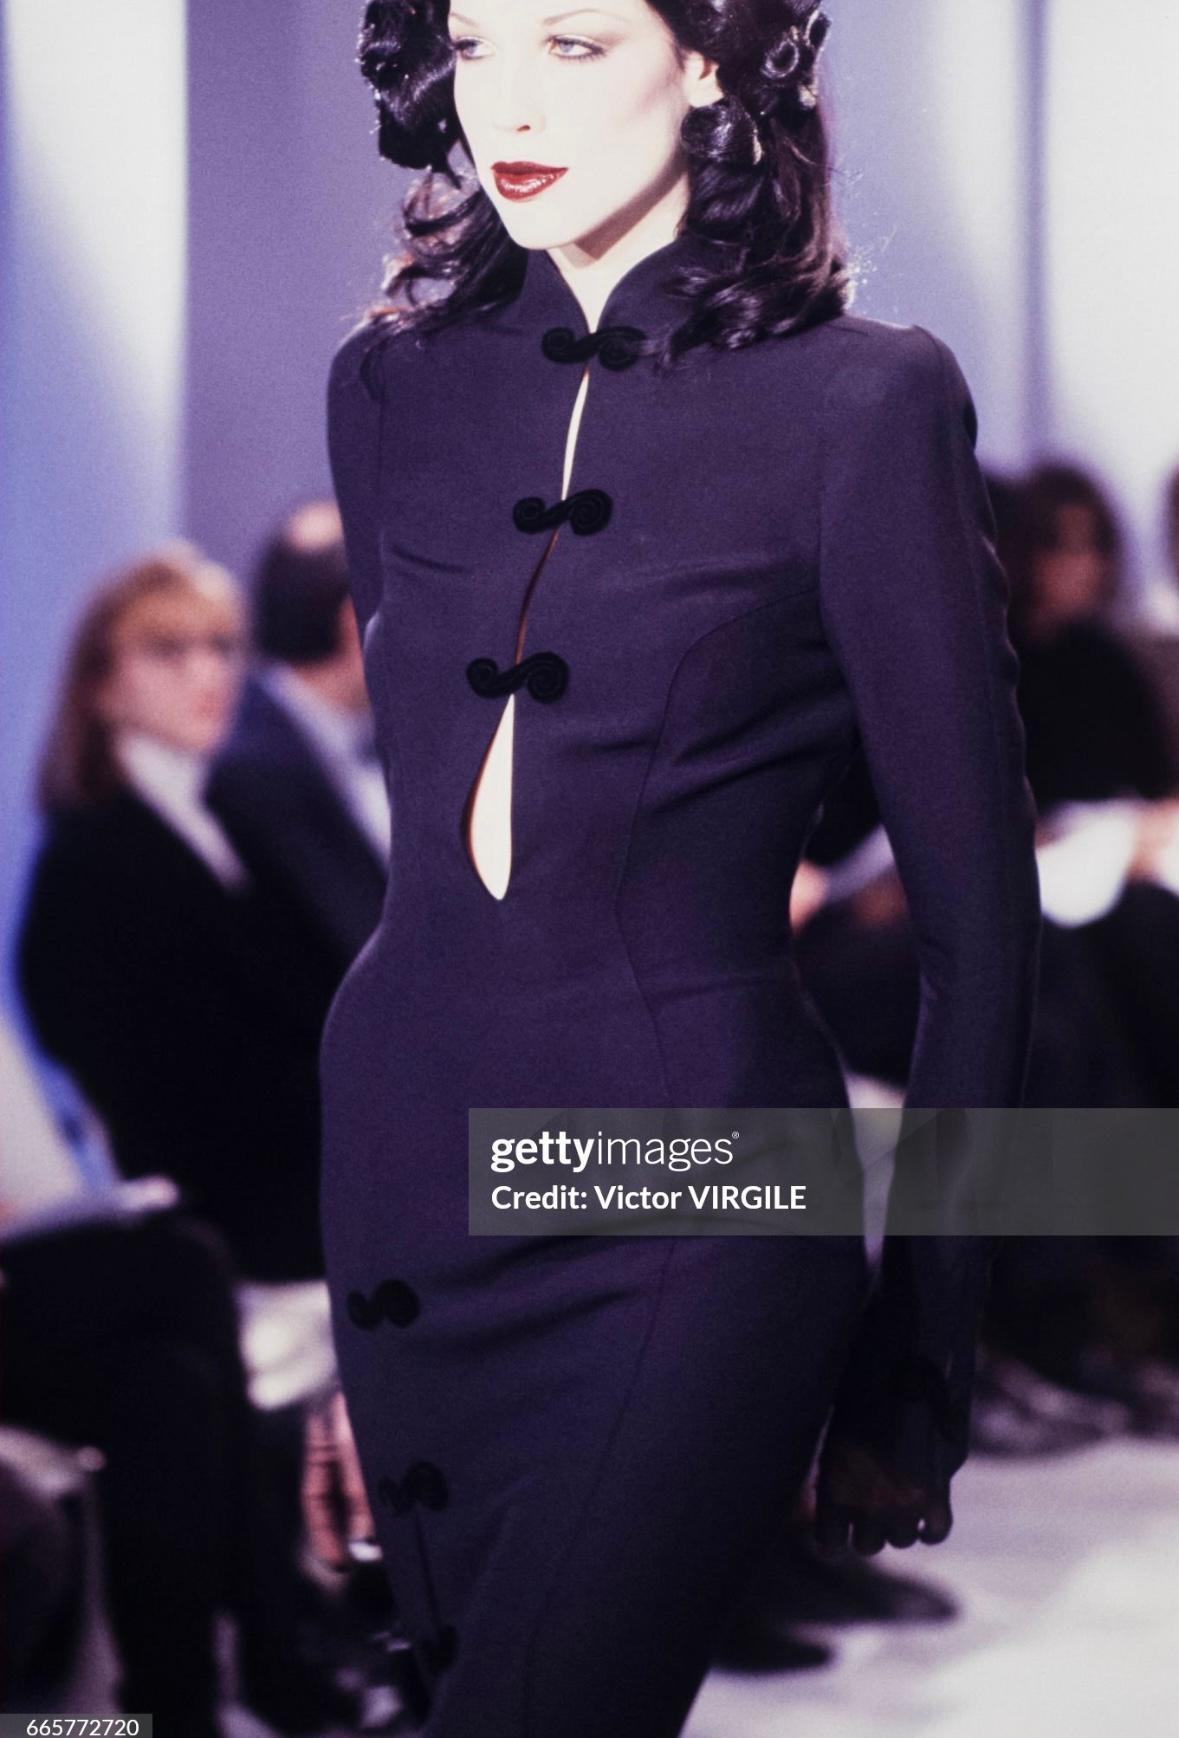 This fabulous black long sleeve ankle length dress was designed by Manfred Mugler for his Fall/Winter 1993 collection. A piece of Mugler's runway history, this ultra chic ankle length dress features a stand up collar, plunging neckline, and slit off